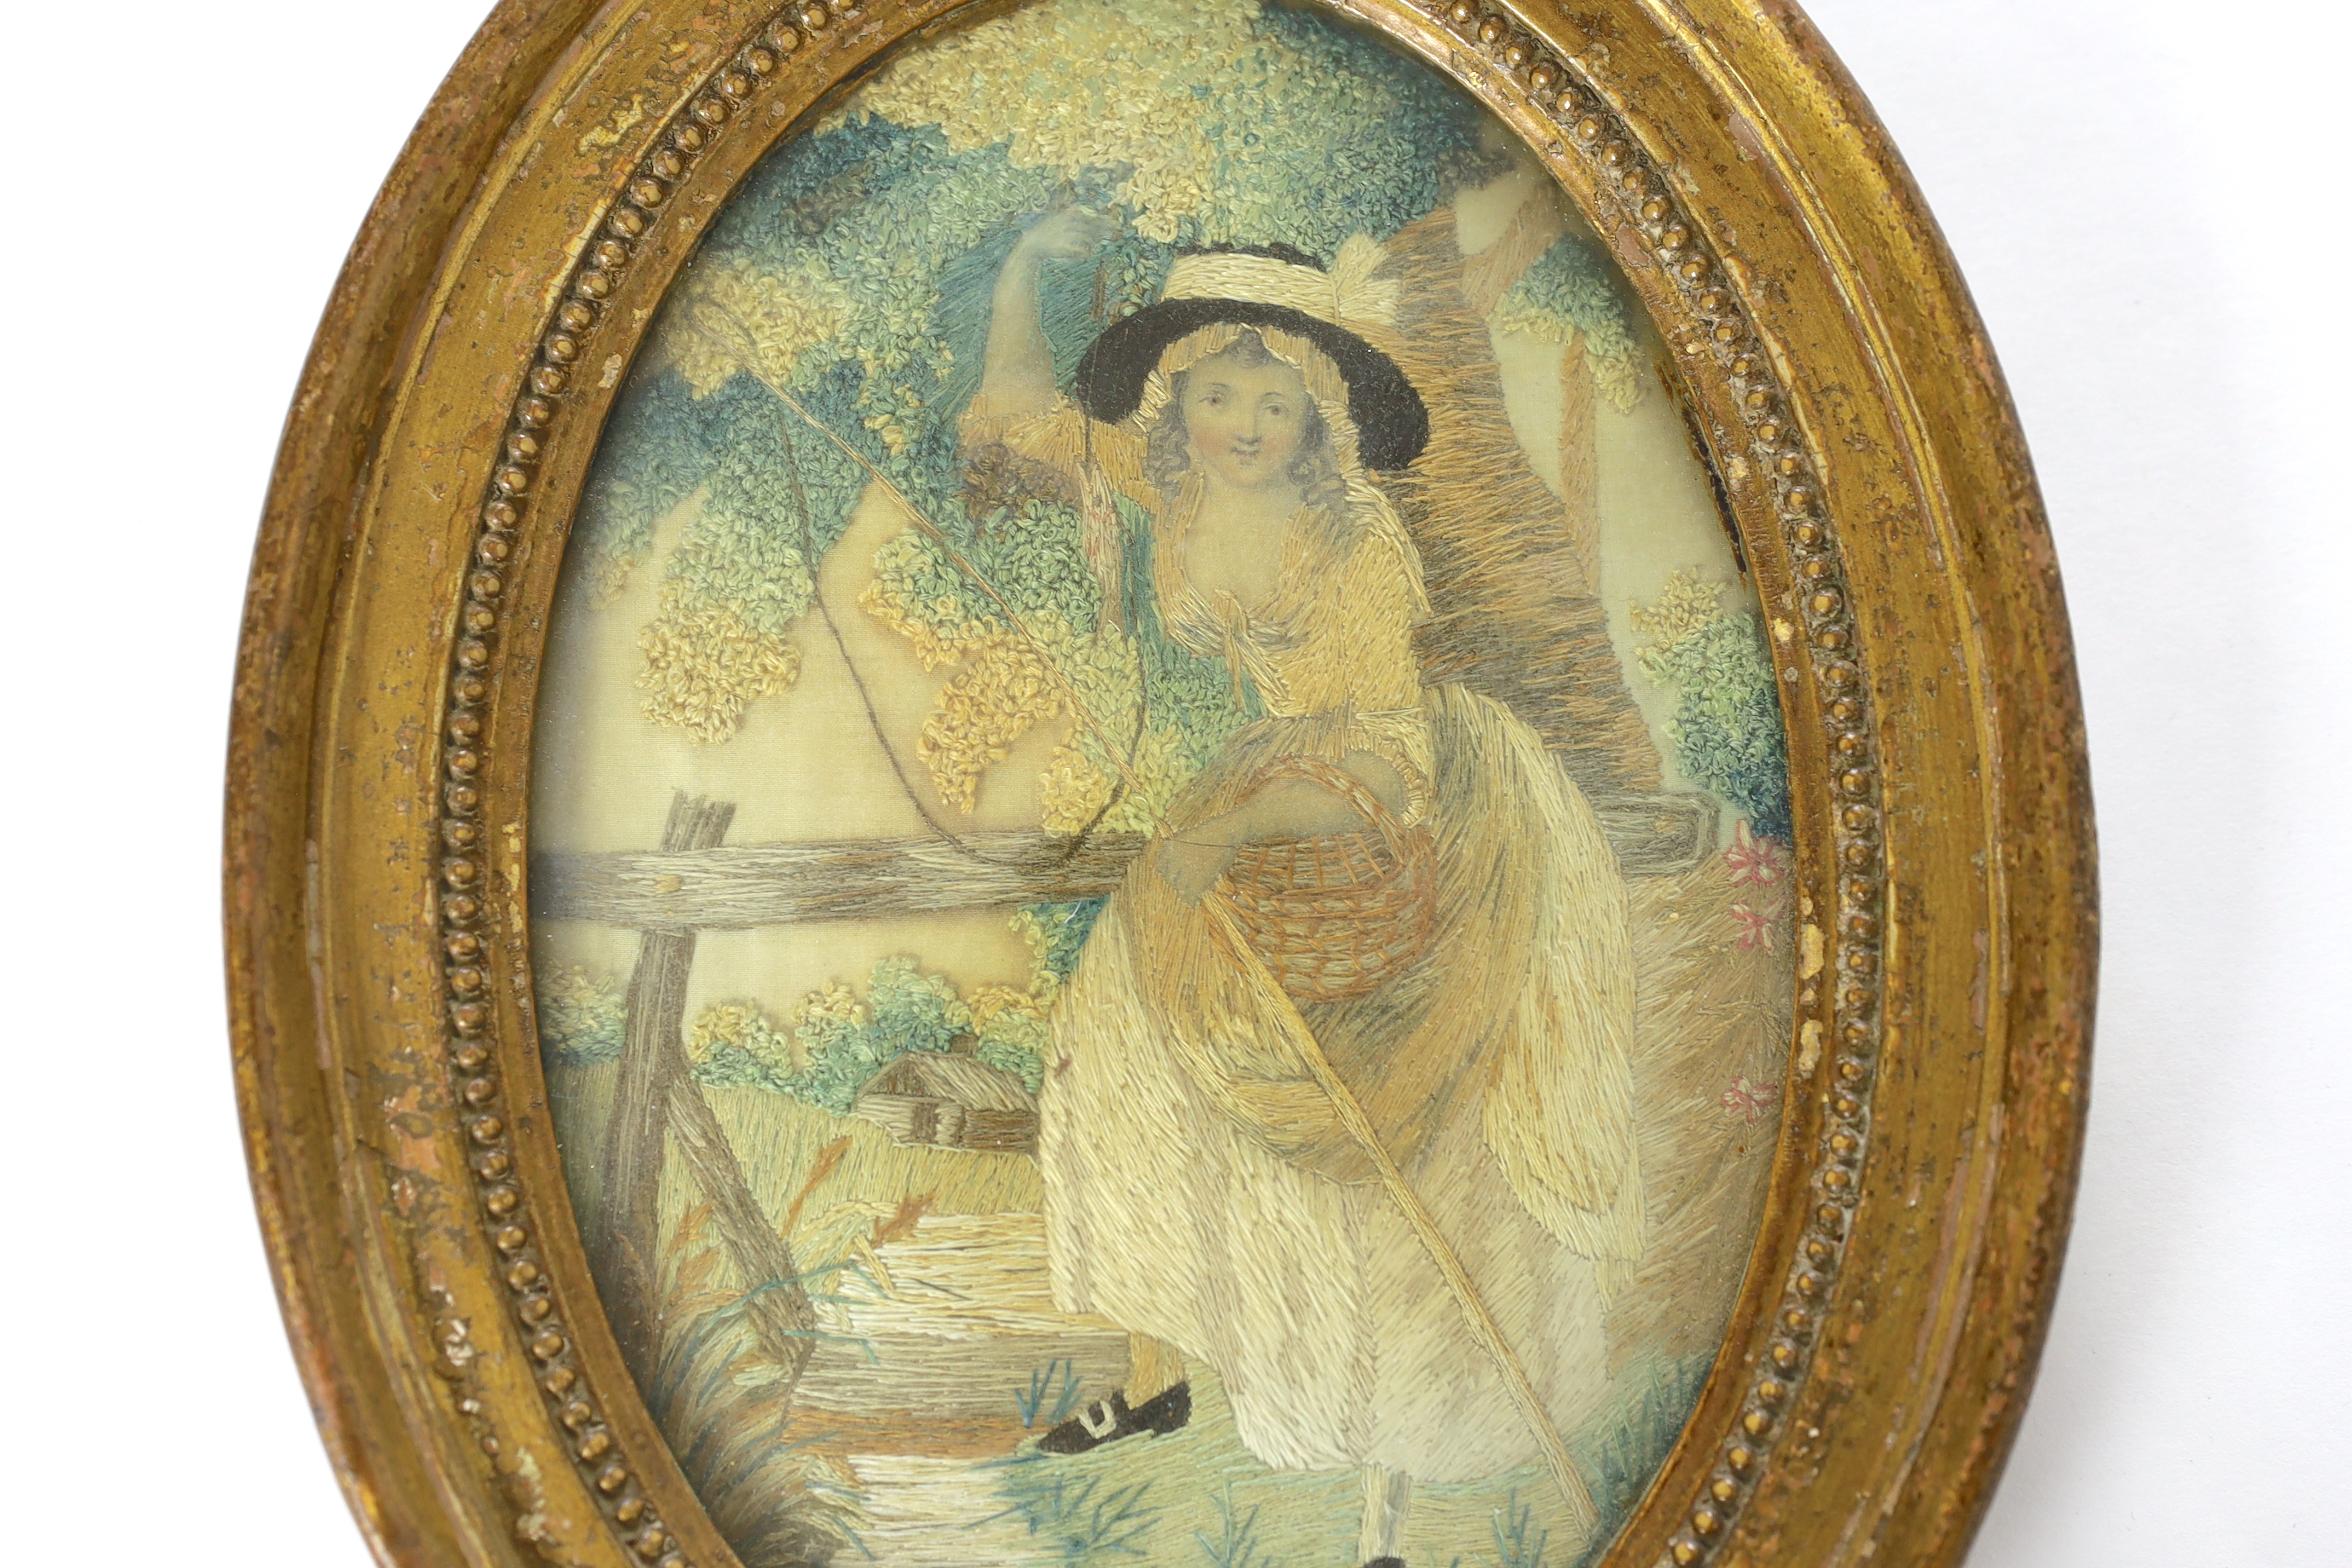 An early George IV oval silk work needlework pastoral embroidery, of a young girl with a fishing rod and basket under a tree by a bridge and stream, worked in fine wools and silks in stem stitch and a large knotting stit